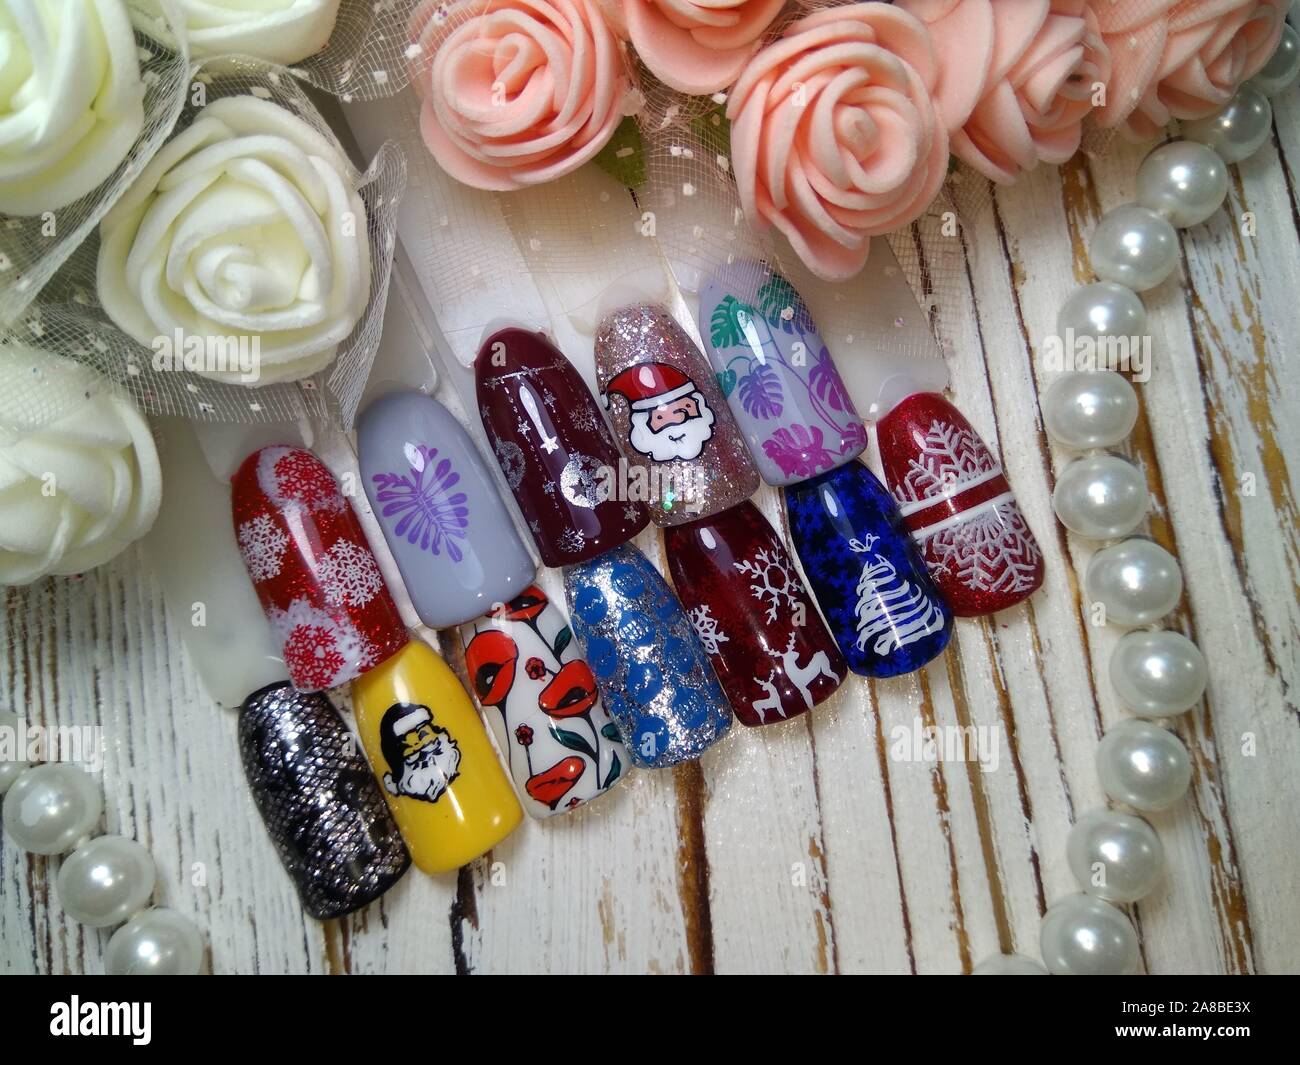 New Year's pattern on artificial nails Stock Photo